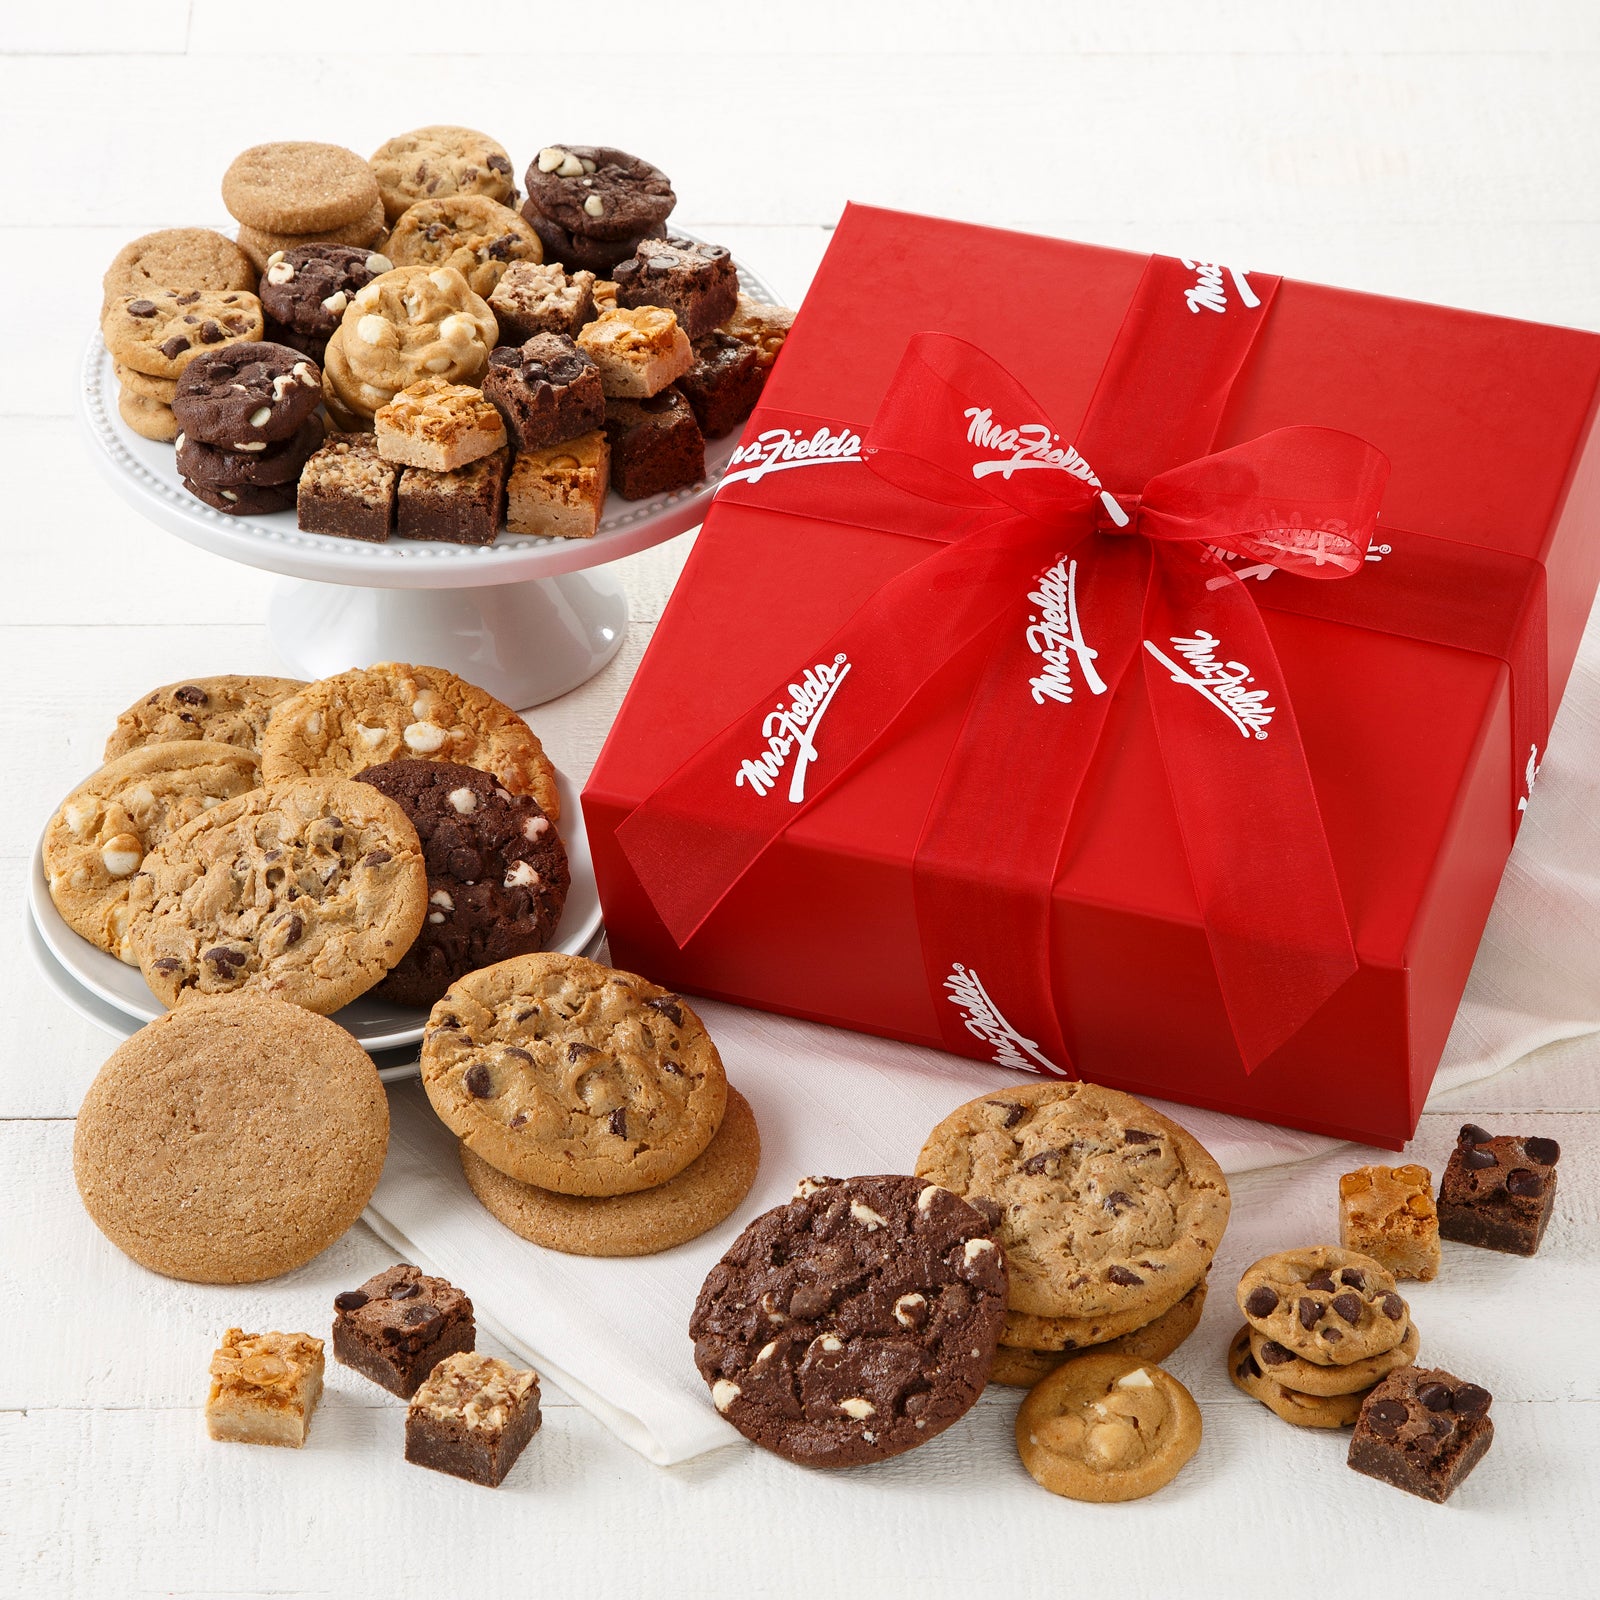 A red gift box tied with a red Mrs. Fields ribbon and surrounded by an assortment of Nibblers®, original cookies, and brownie bites.